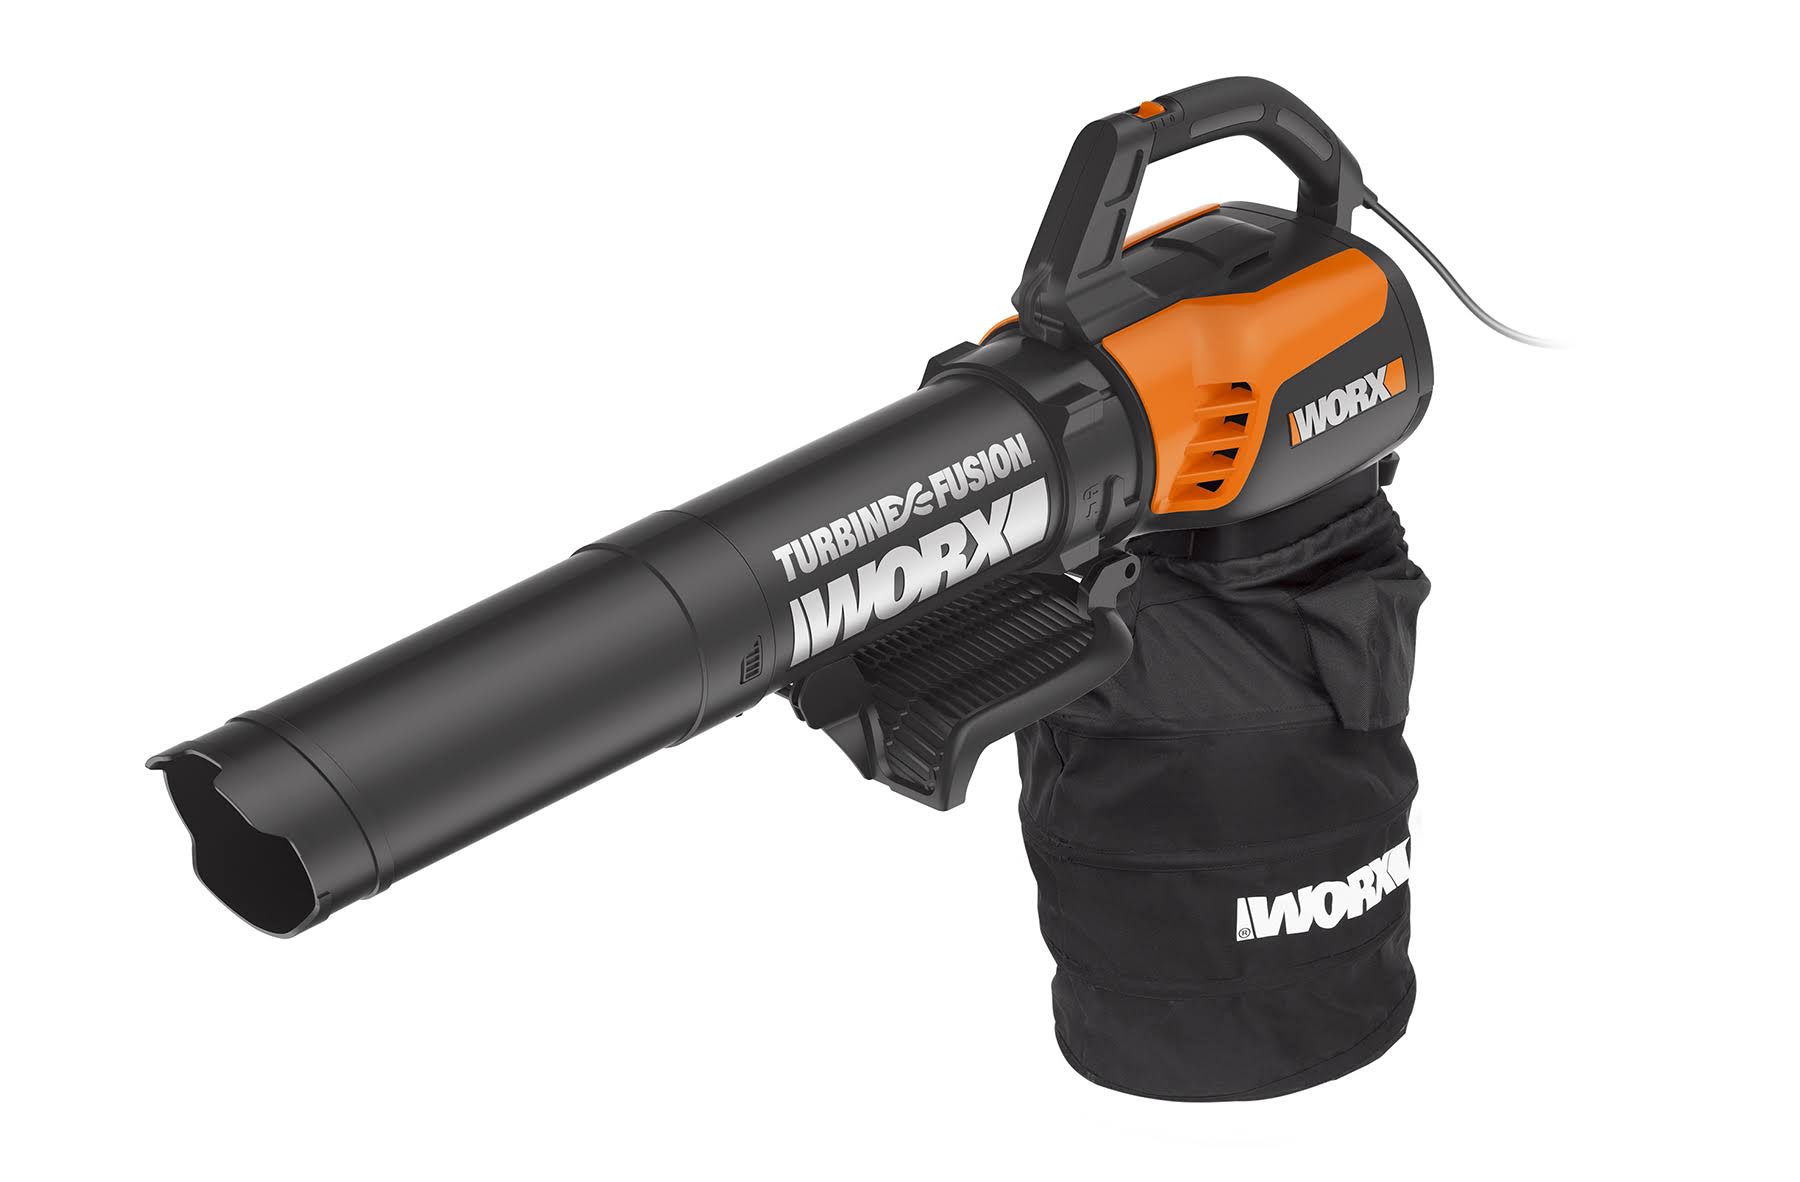 WORX TURBINE Fusion Leaf Blower, Mulcher, and Vacuum with Dual-Stage Metal Impeller and TURBINE Fan Technology – WG510